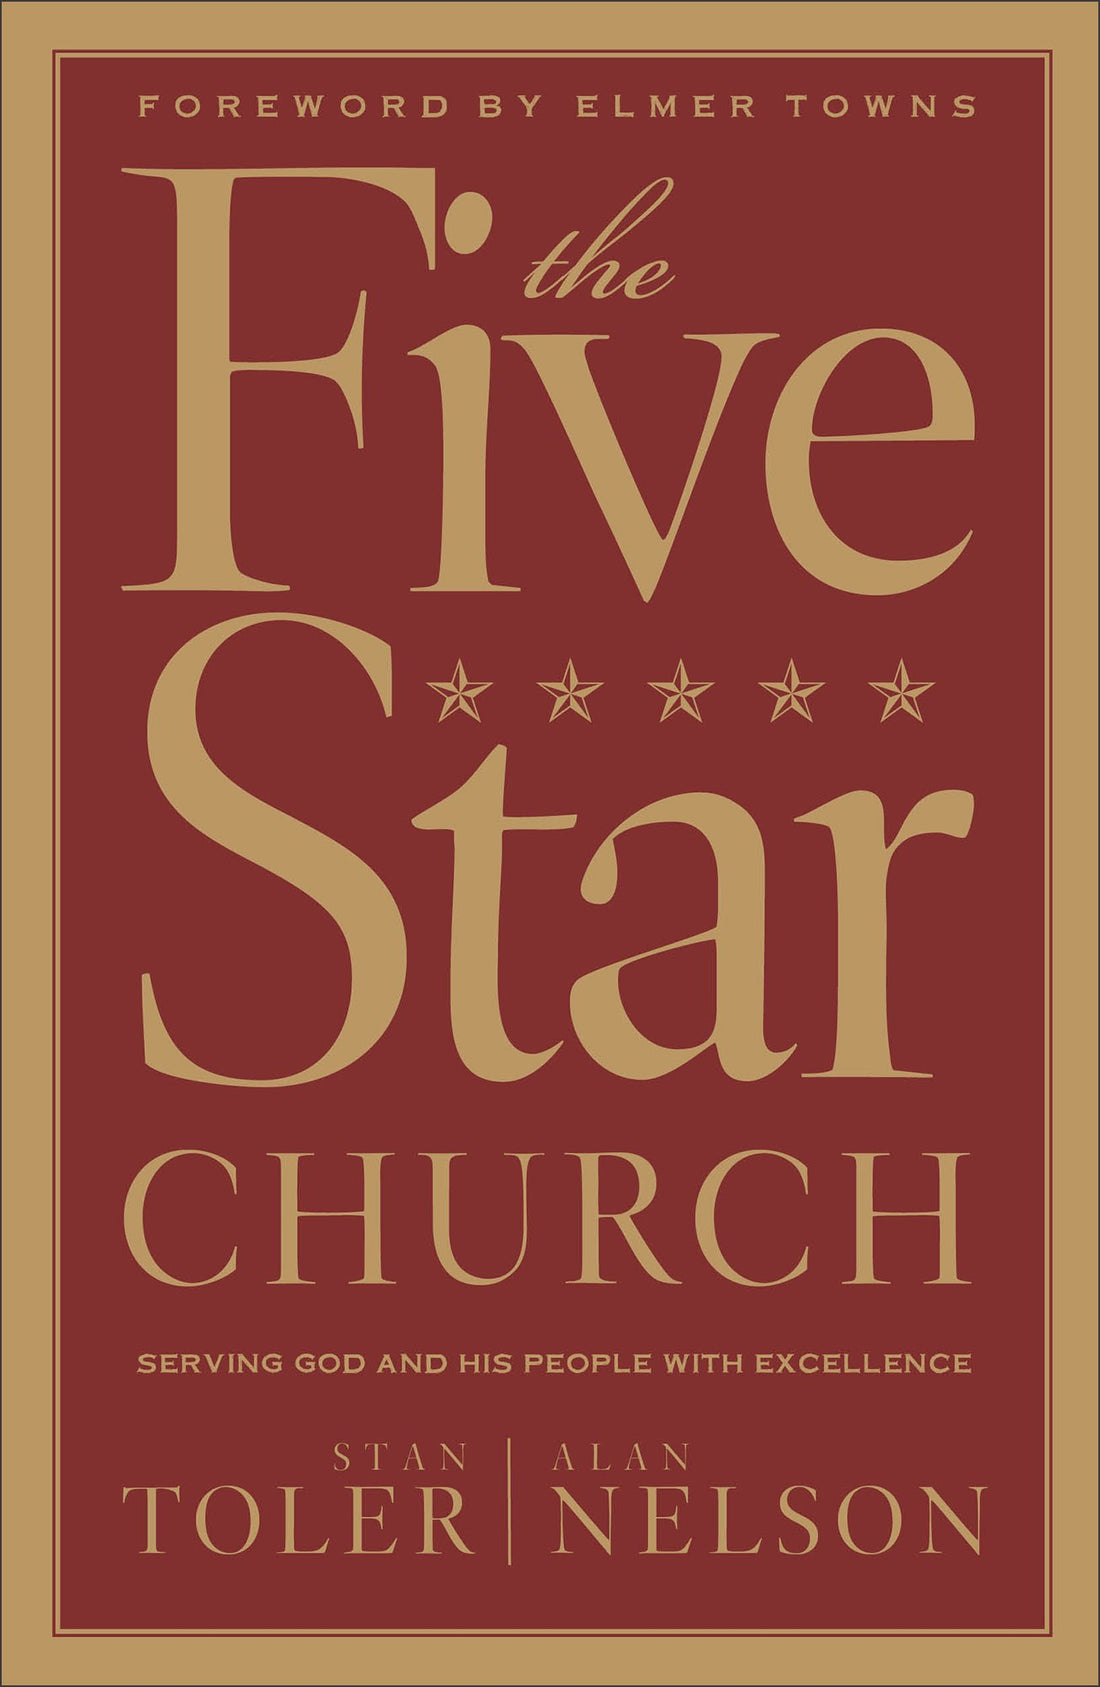 Seed of Abraham Christian Bookstore - The Five Star Church